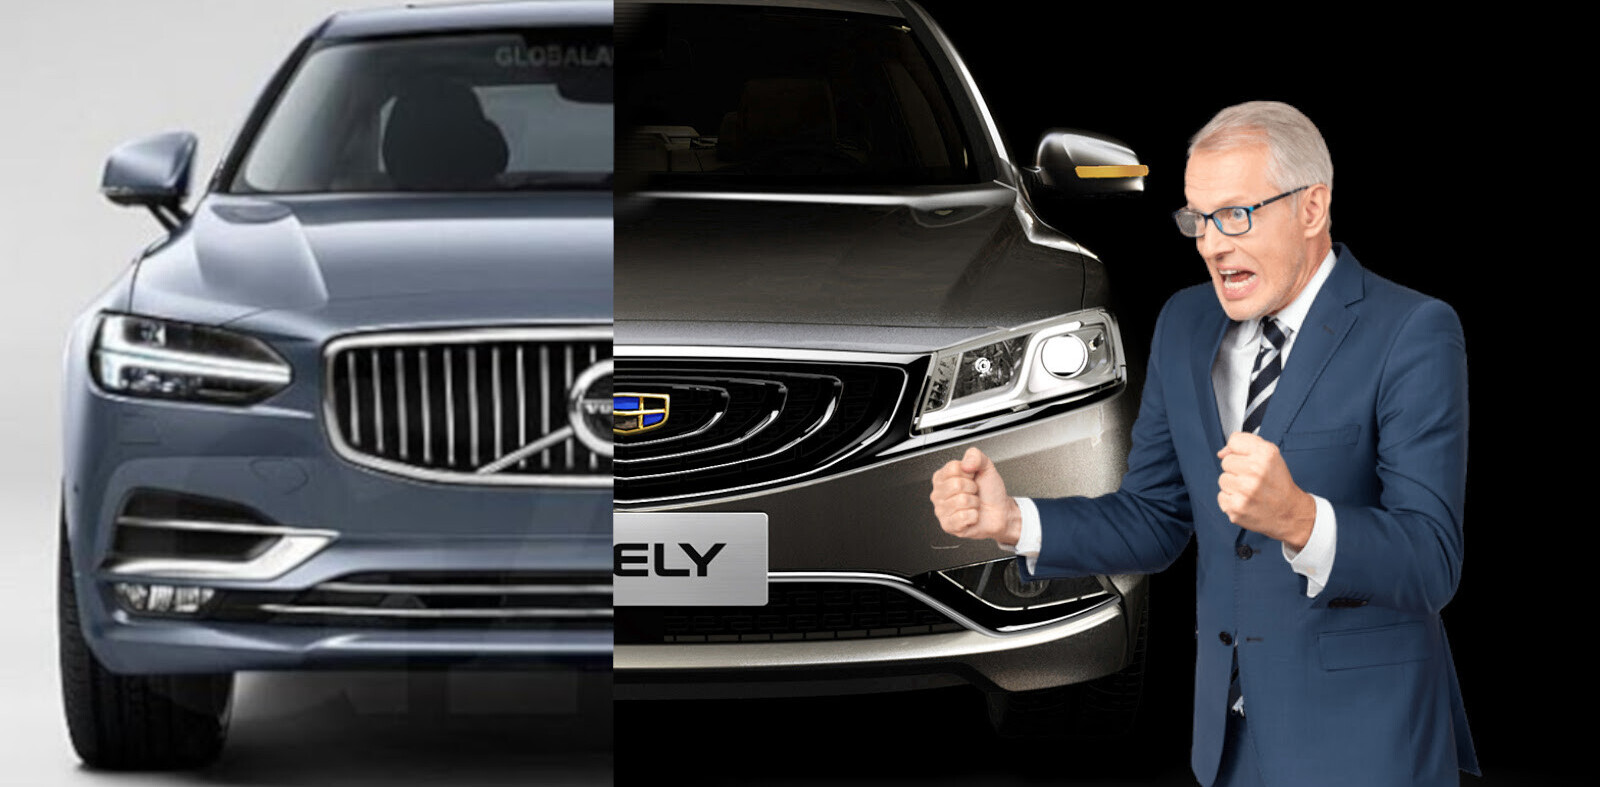 Volvo Cars is reportedly being merged with China’s Geely